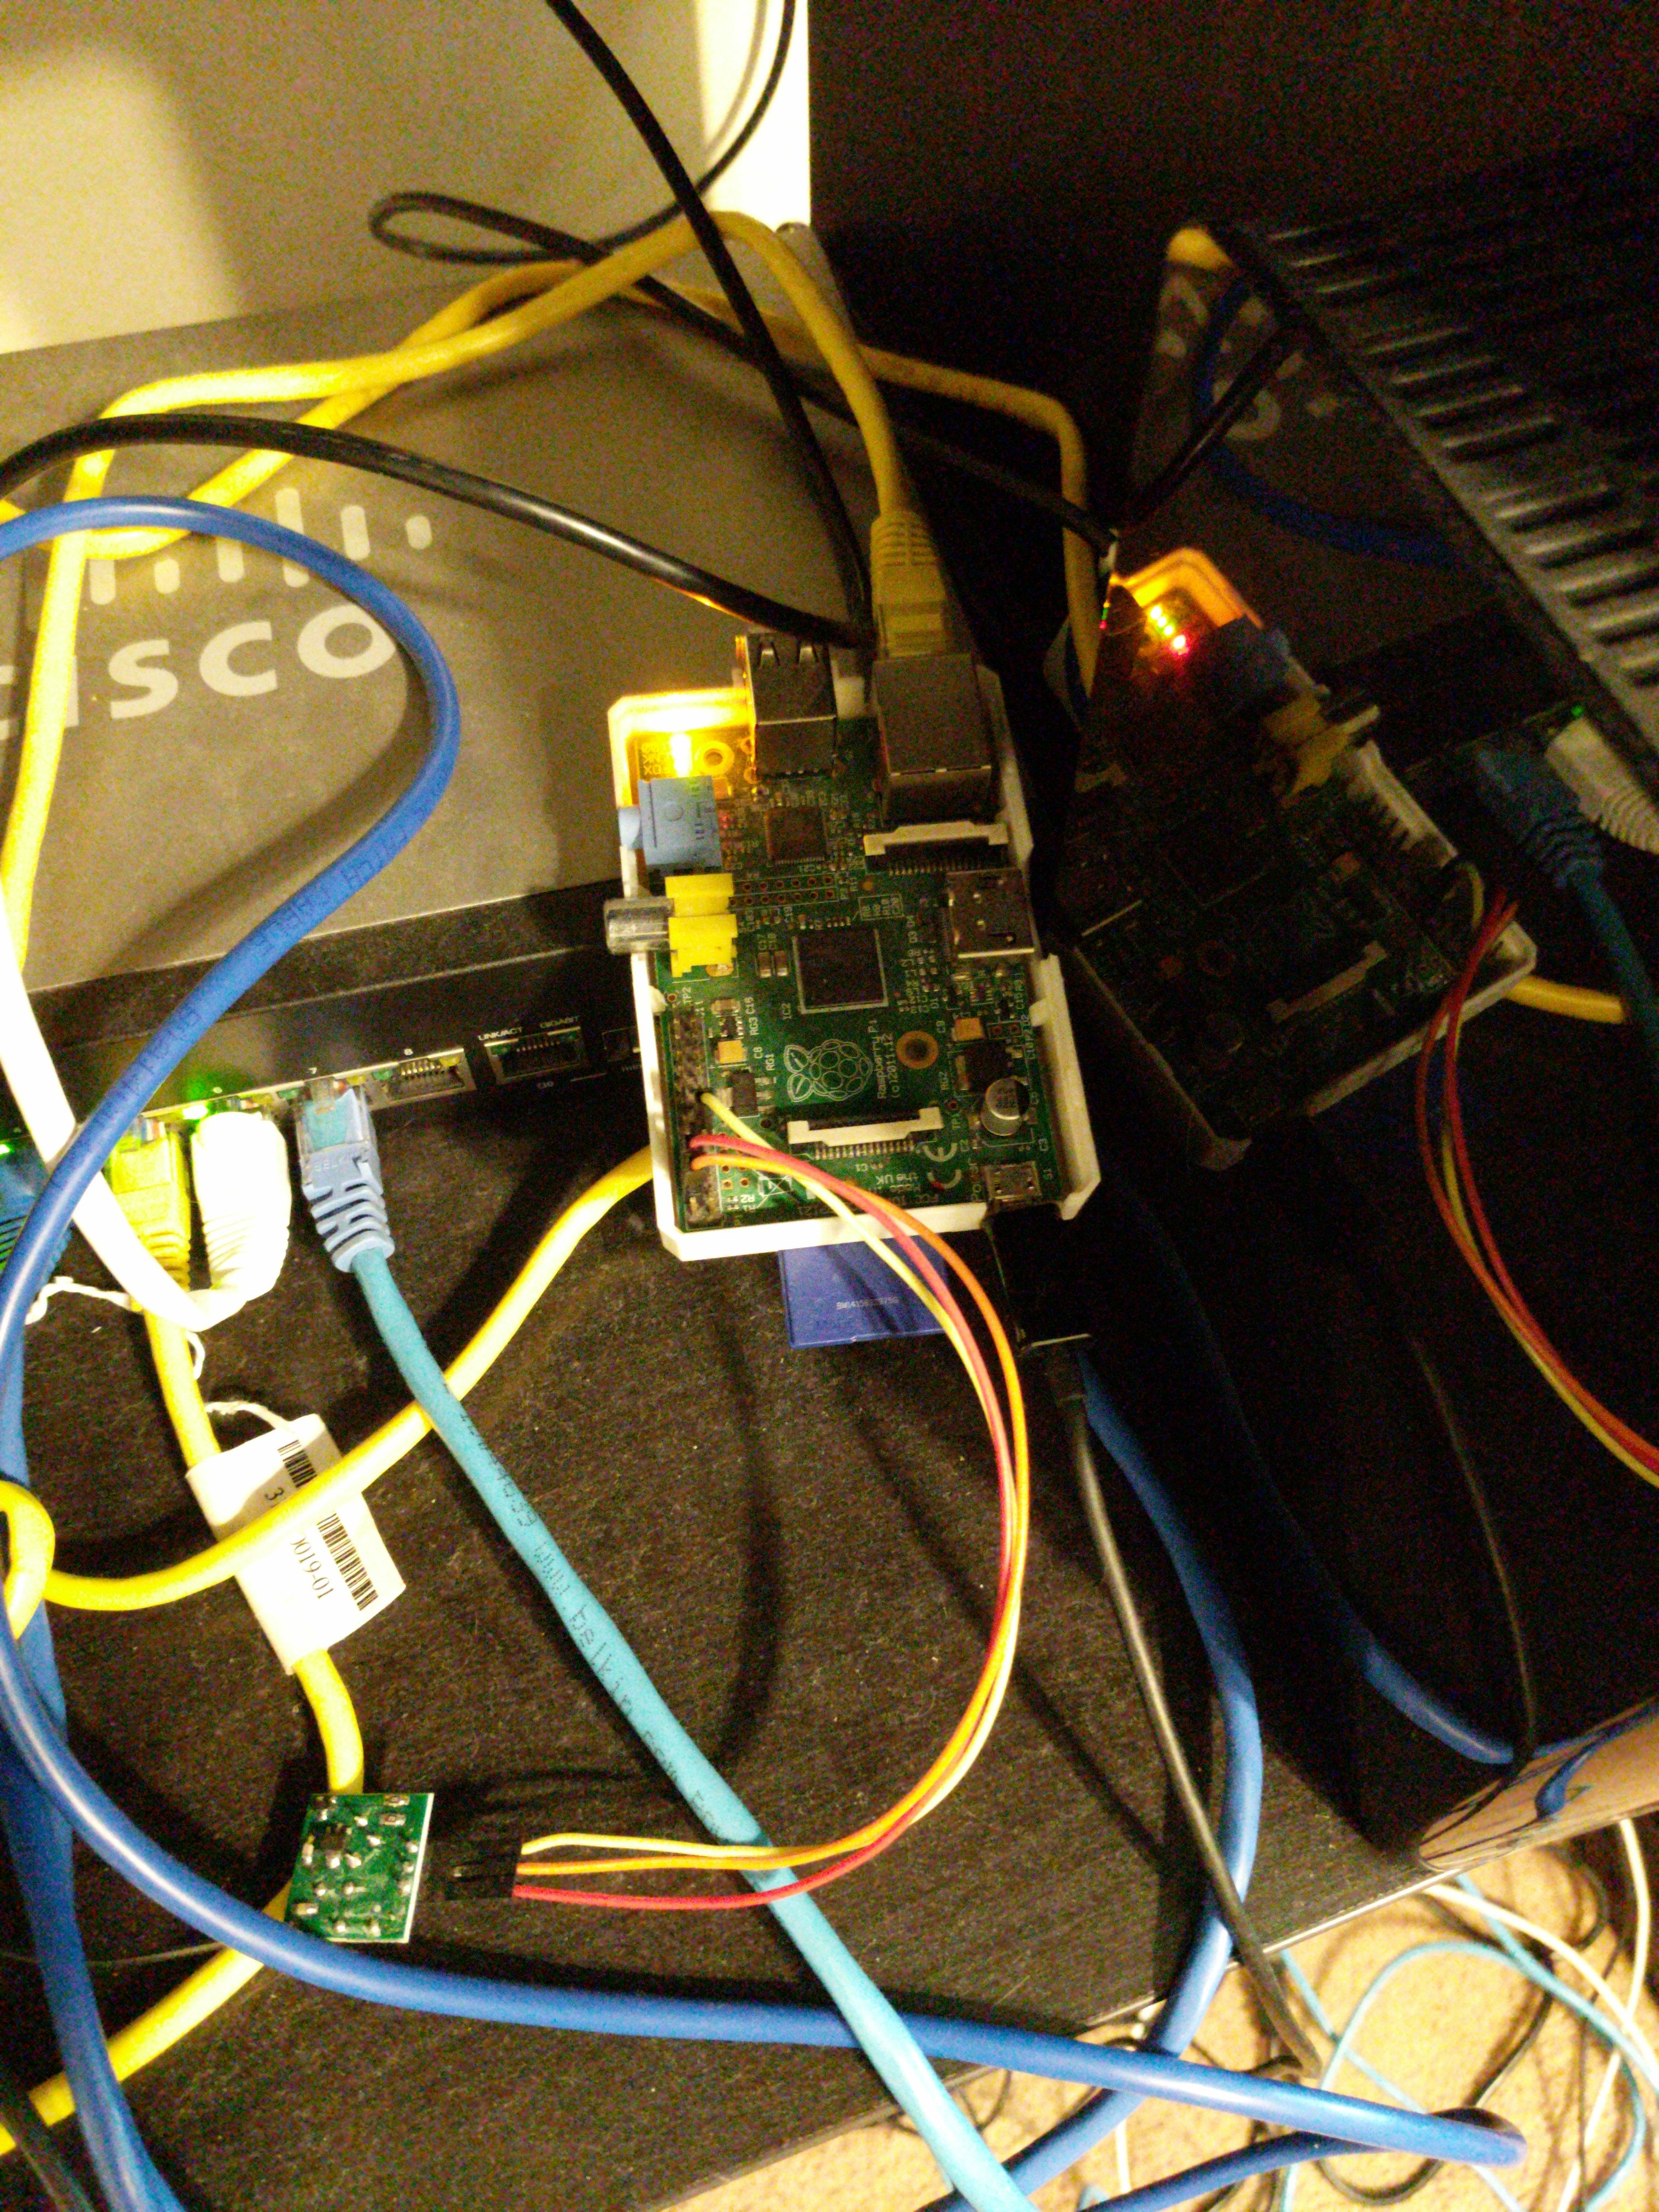 My raspberry Pi with 433 Mhz transmitter attached